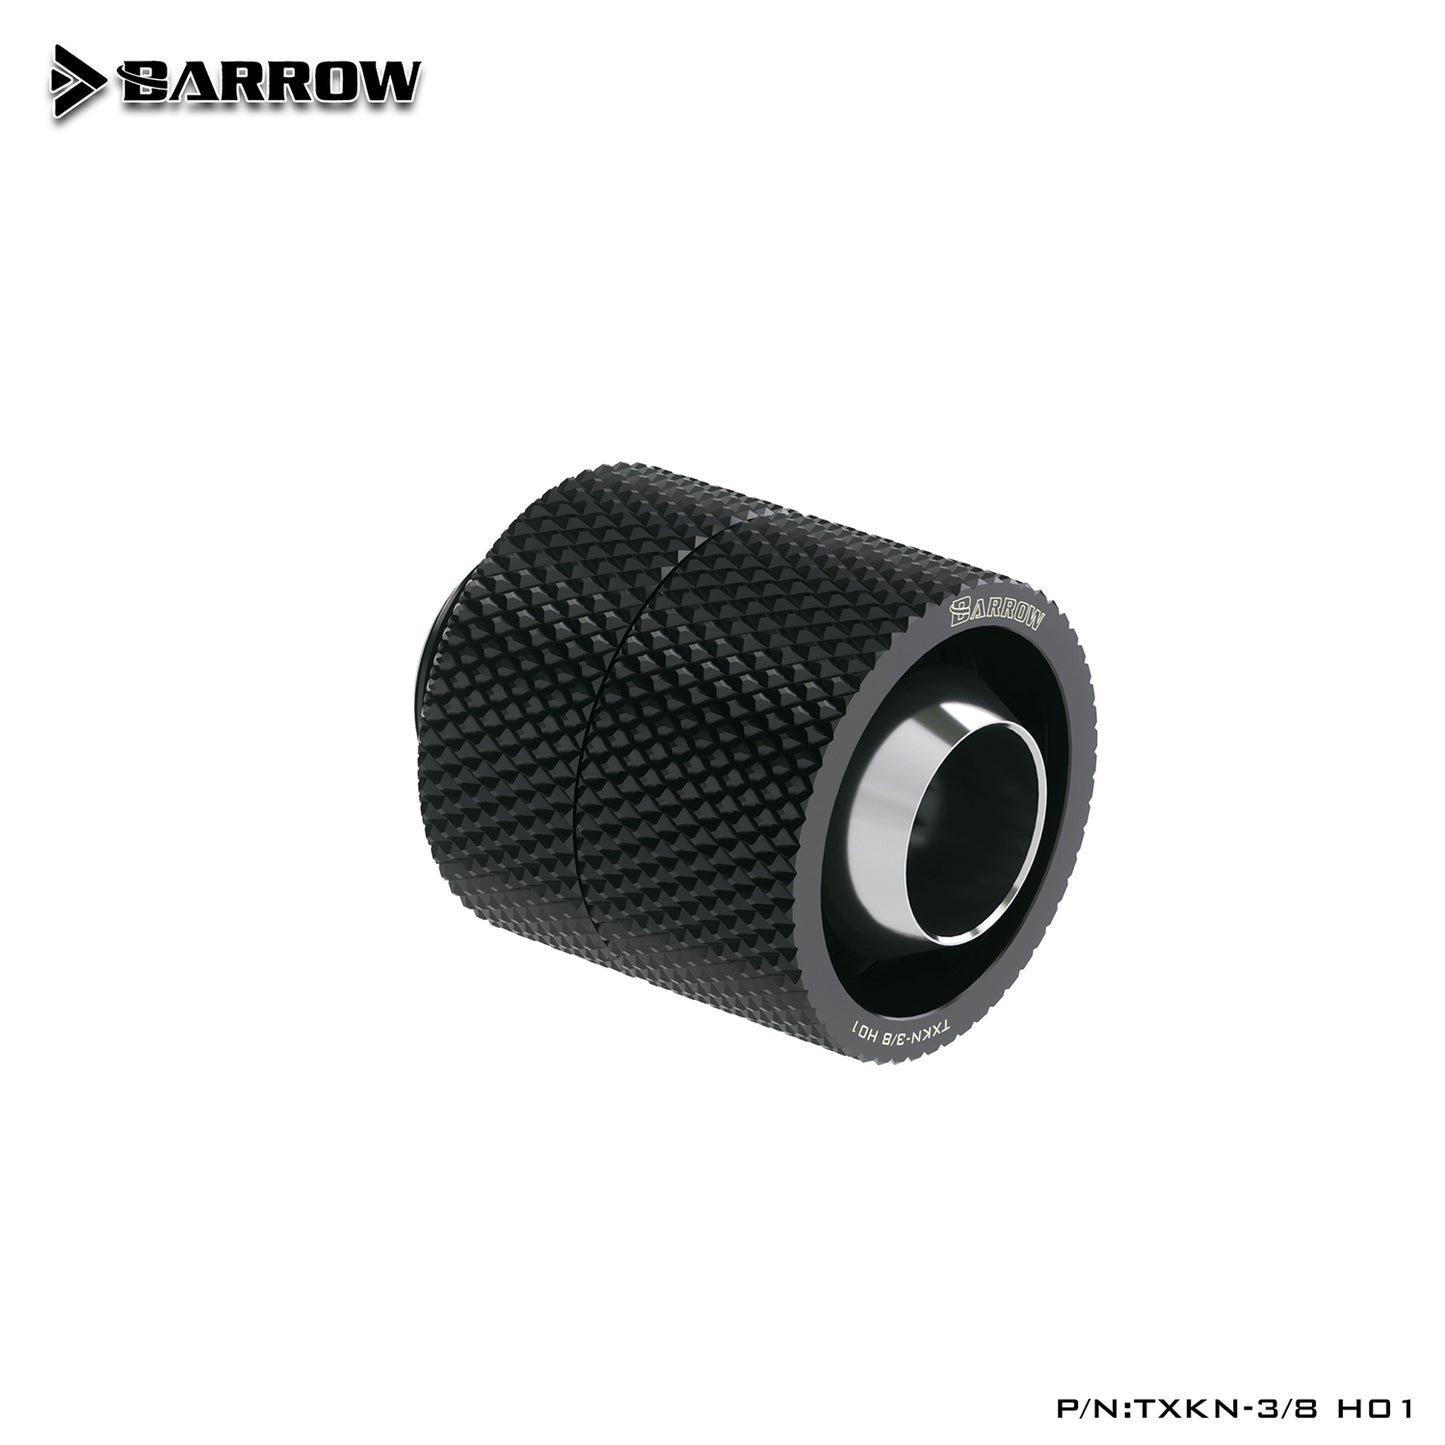 Barrow With 360° Rotary ompression Fitting(ID3/8-OD5/8)Compression Connector, Soft Tubing TXKN-3/8 H01